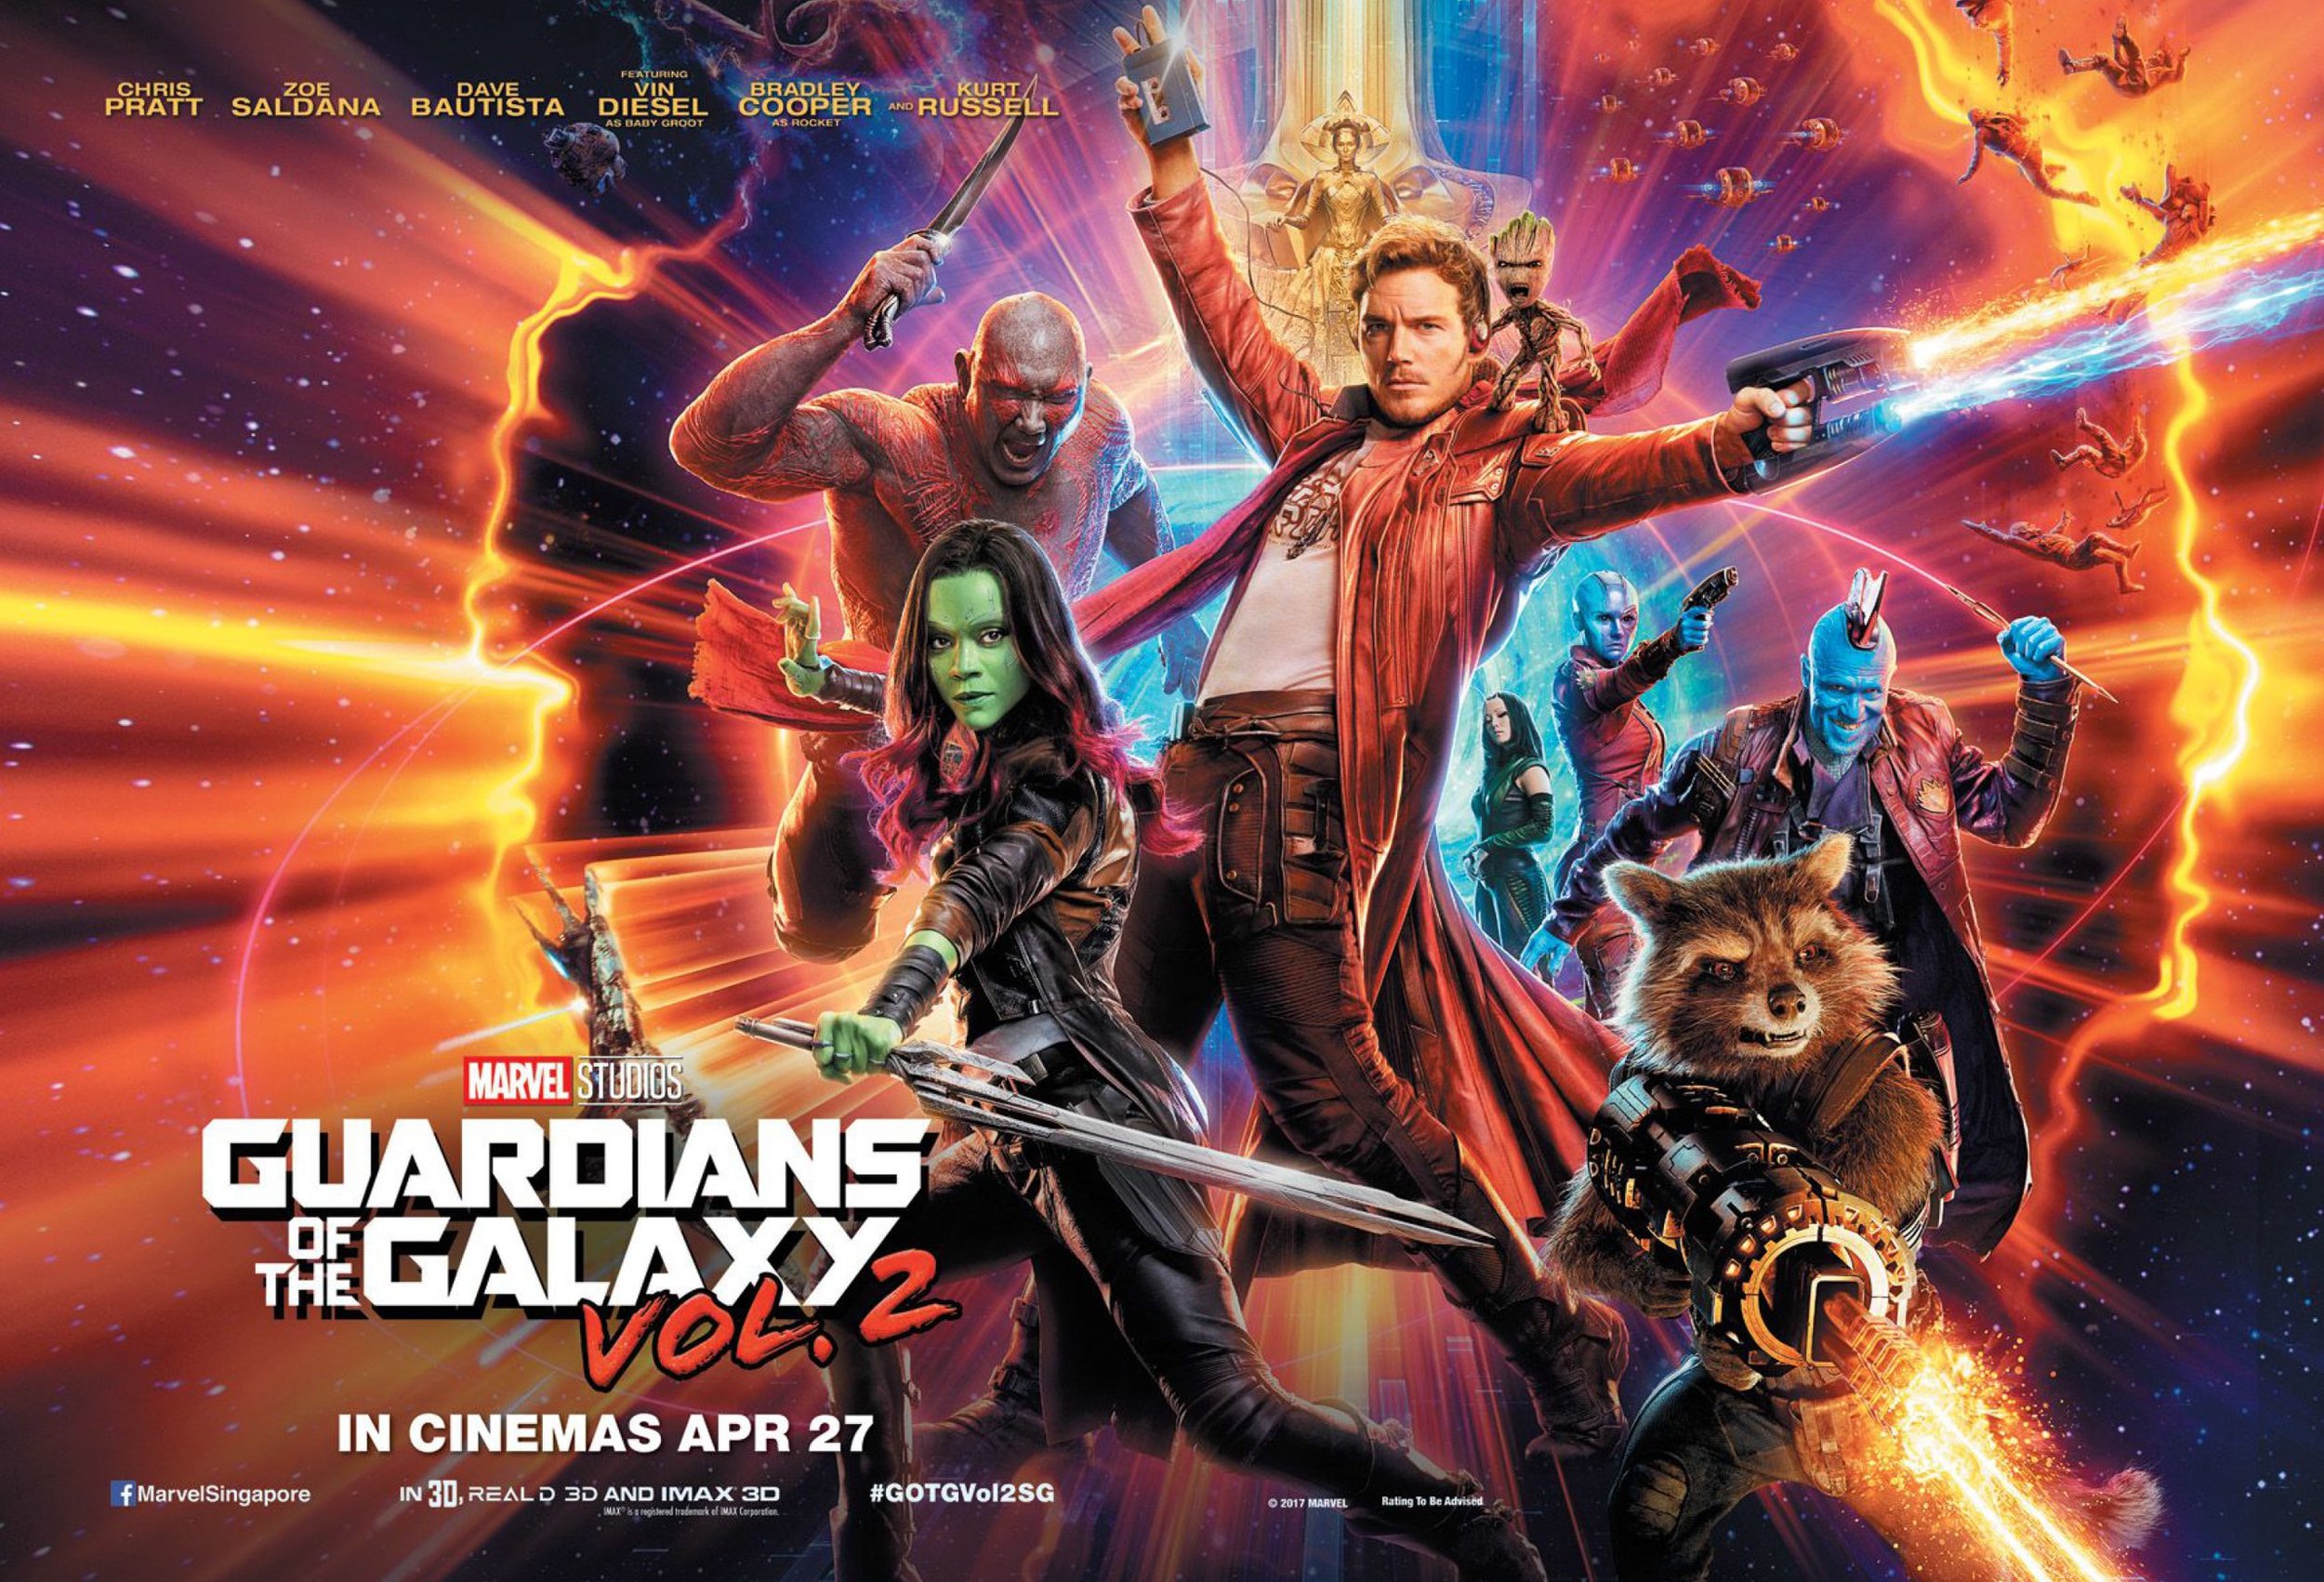 Guardians_Of_The_Galaxy_Vol_2_Official_Poster_Landscape.jpg